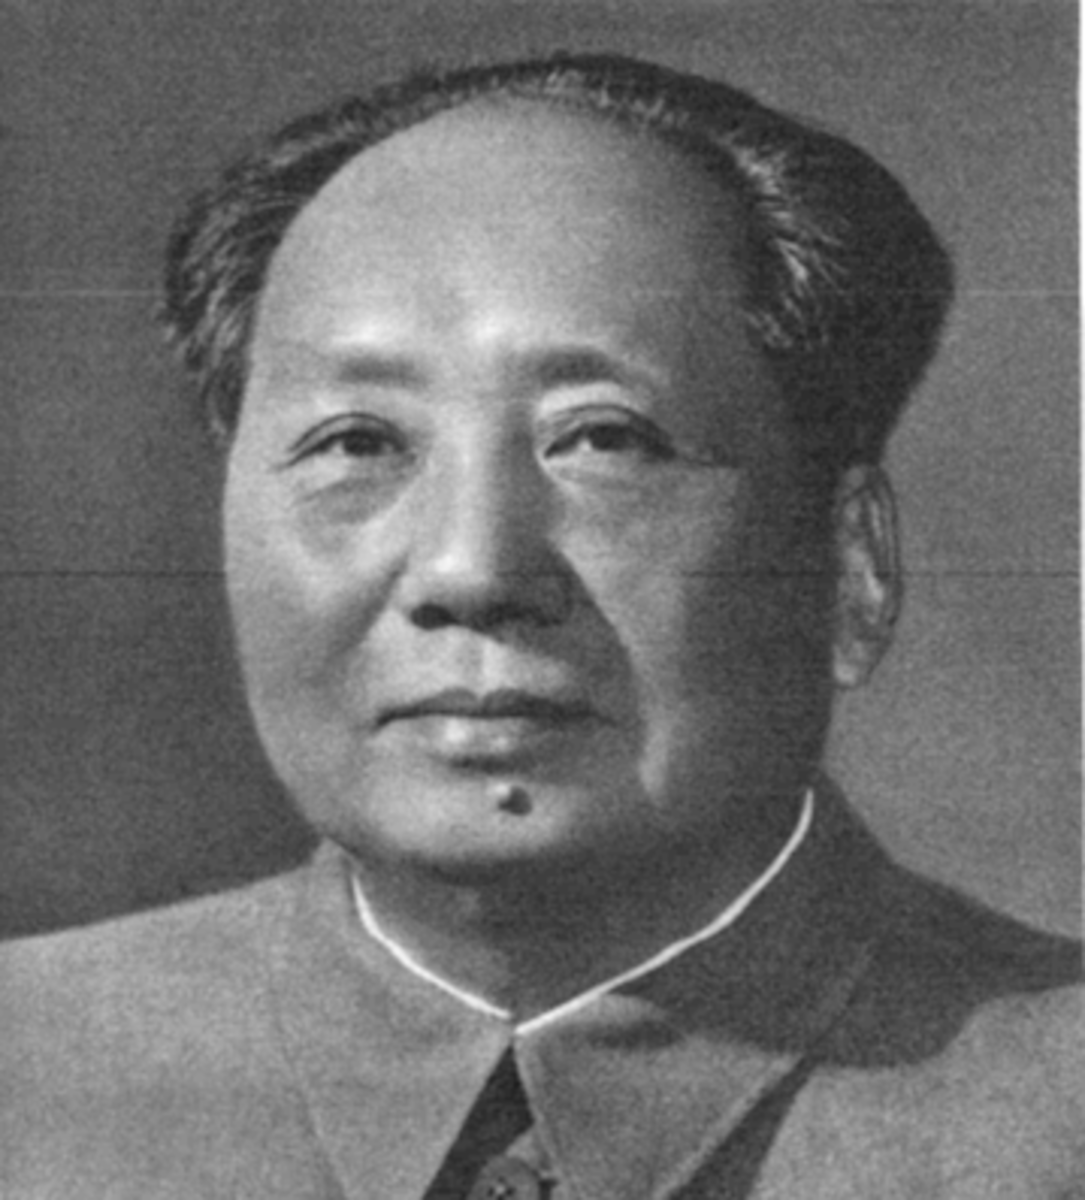 CHAIRMAN MAO THE SOCIALIST BELIEVED IN SENSITIVITY TRAINING FOR THE POLITICALLY INCORRECT